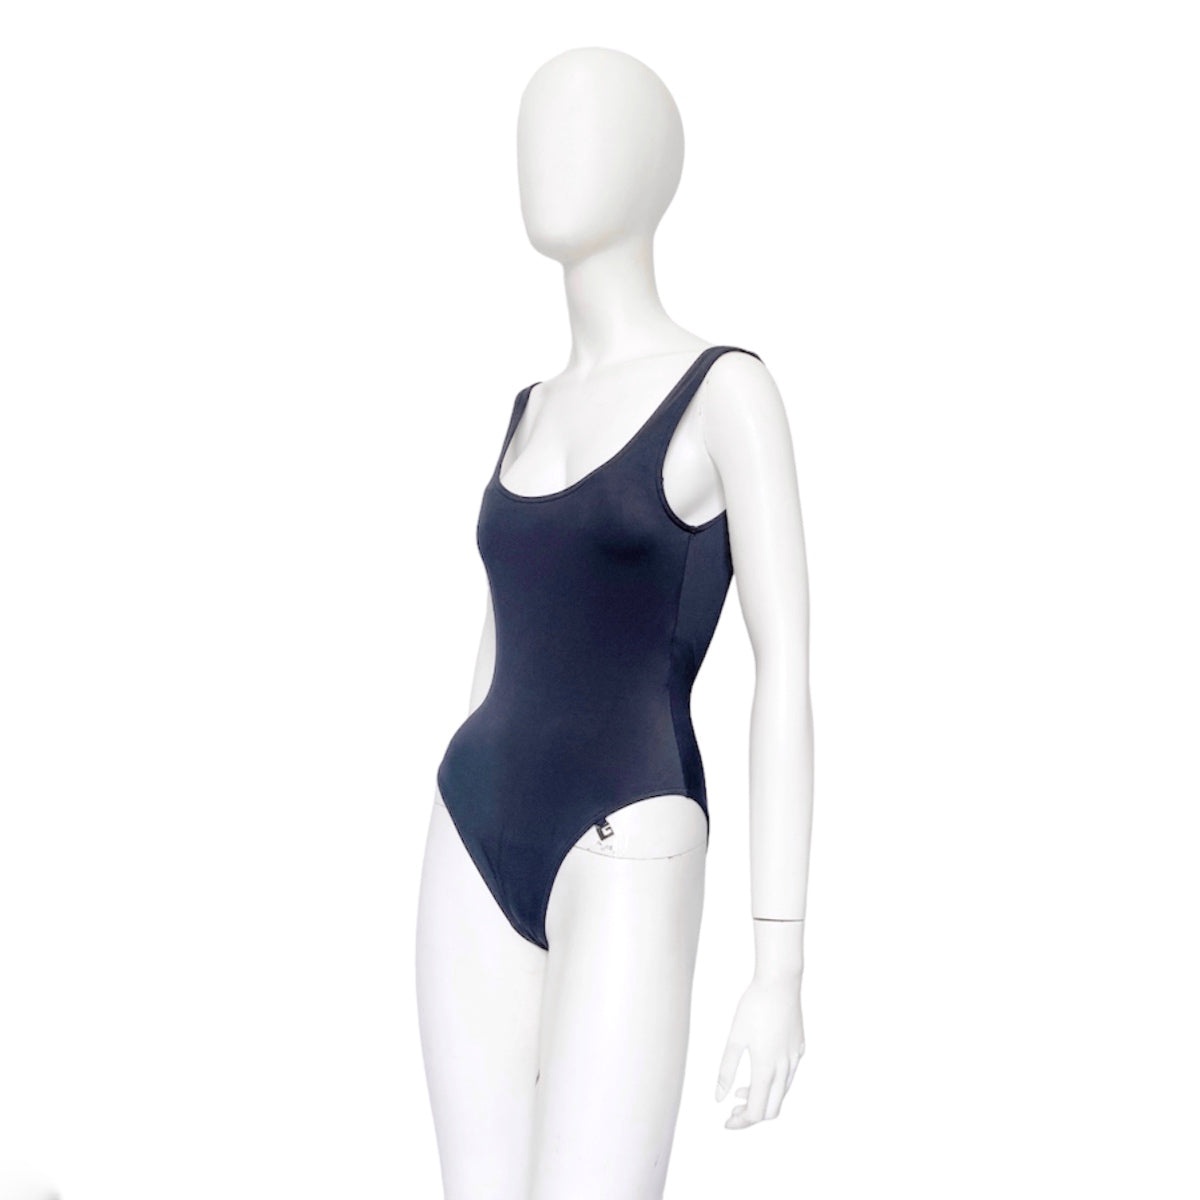 BWNT Gucci Spring 1999 Tom Ford Plunging Backless Navy One-Piece Swimsuit - 2